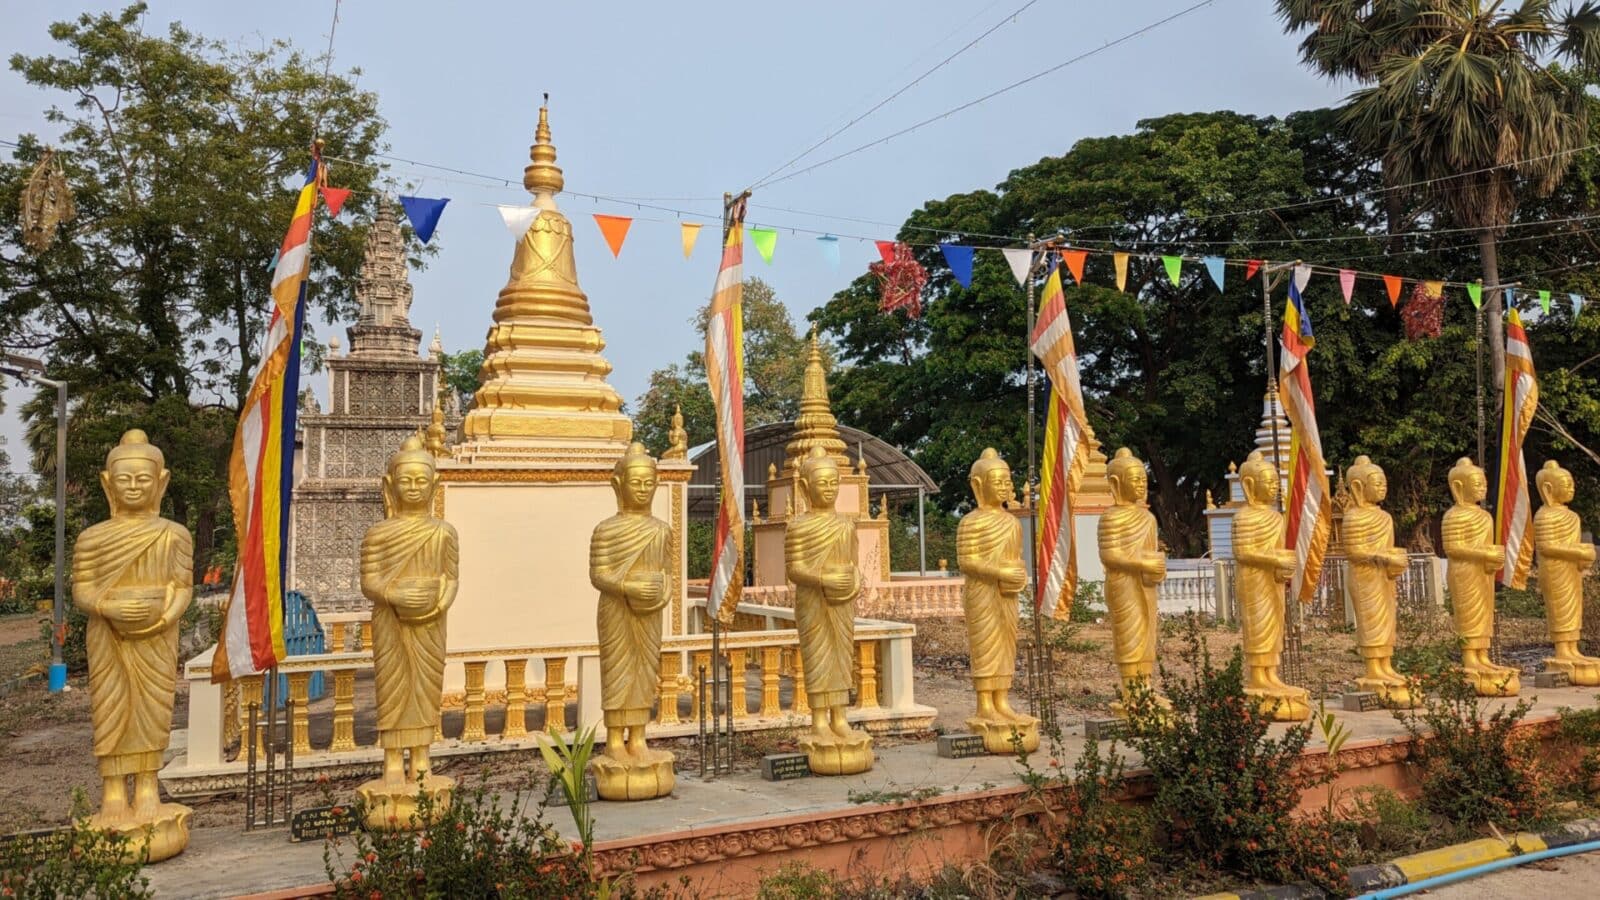 Cambodia's New Temple golden Buddha's on CroisiEurope's Mekong River cruise